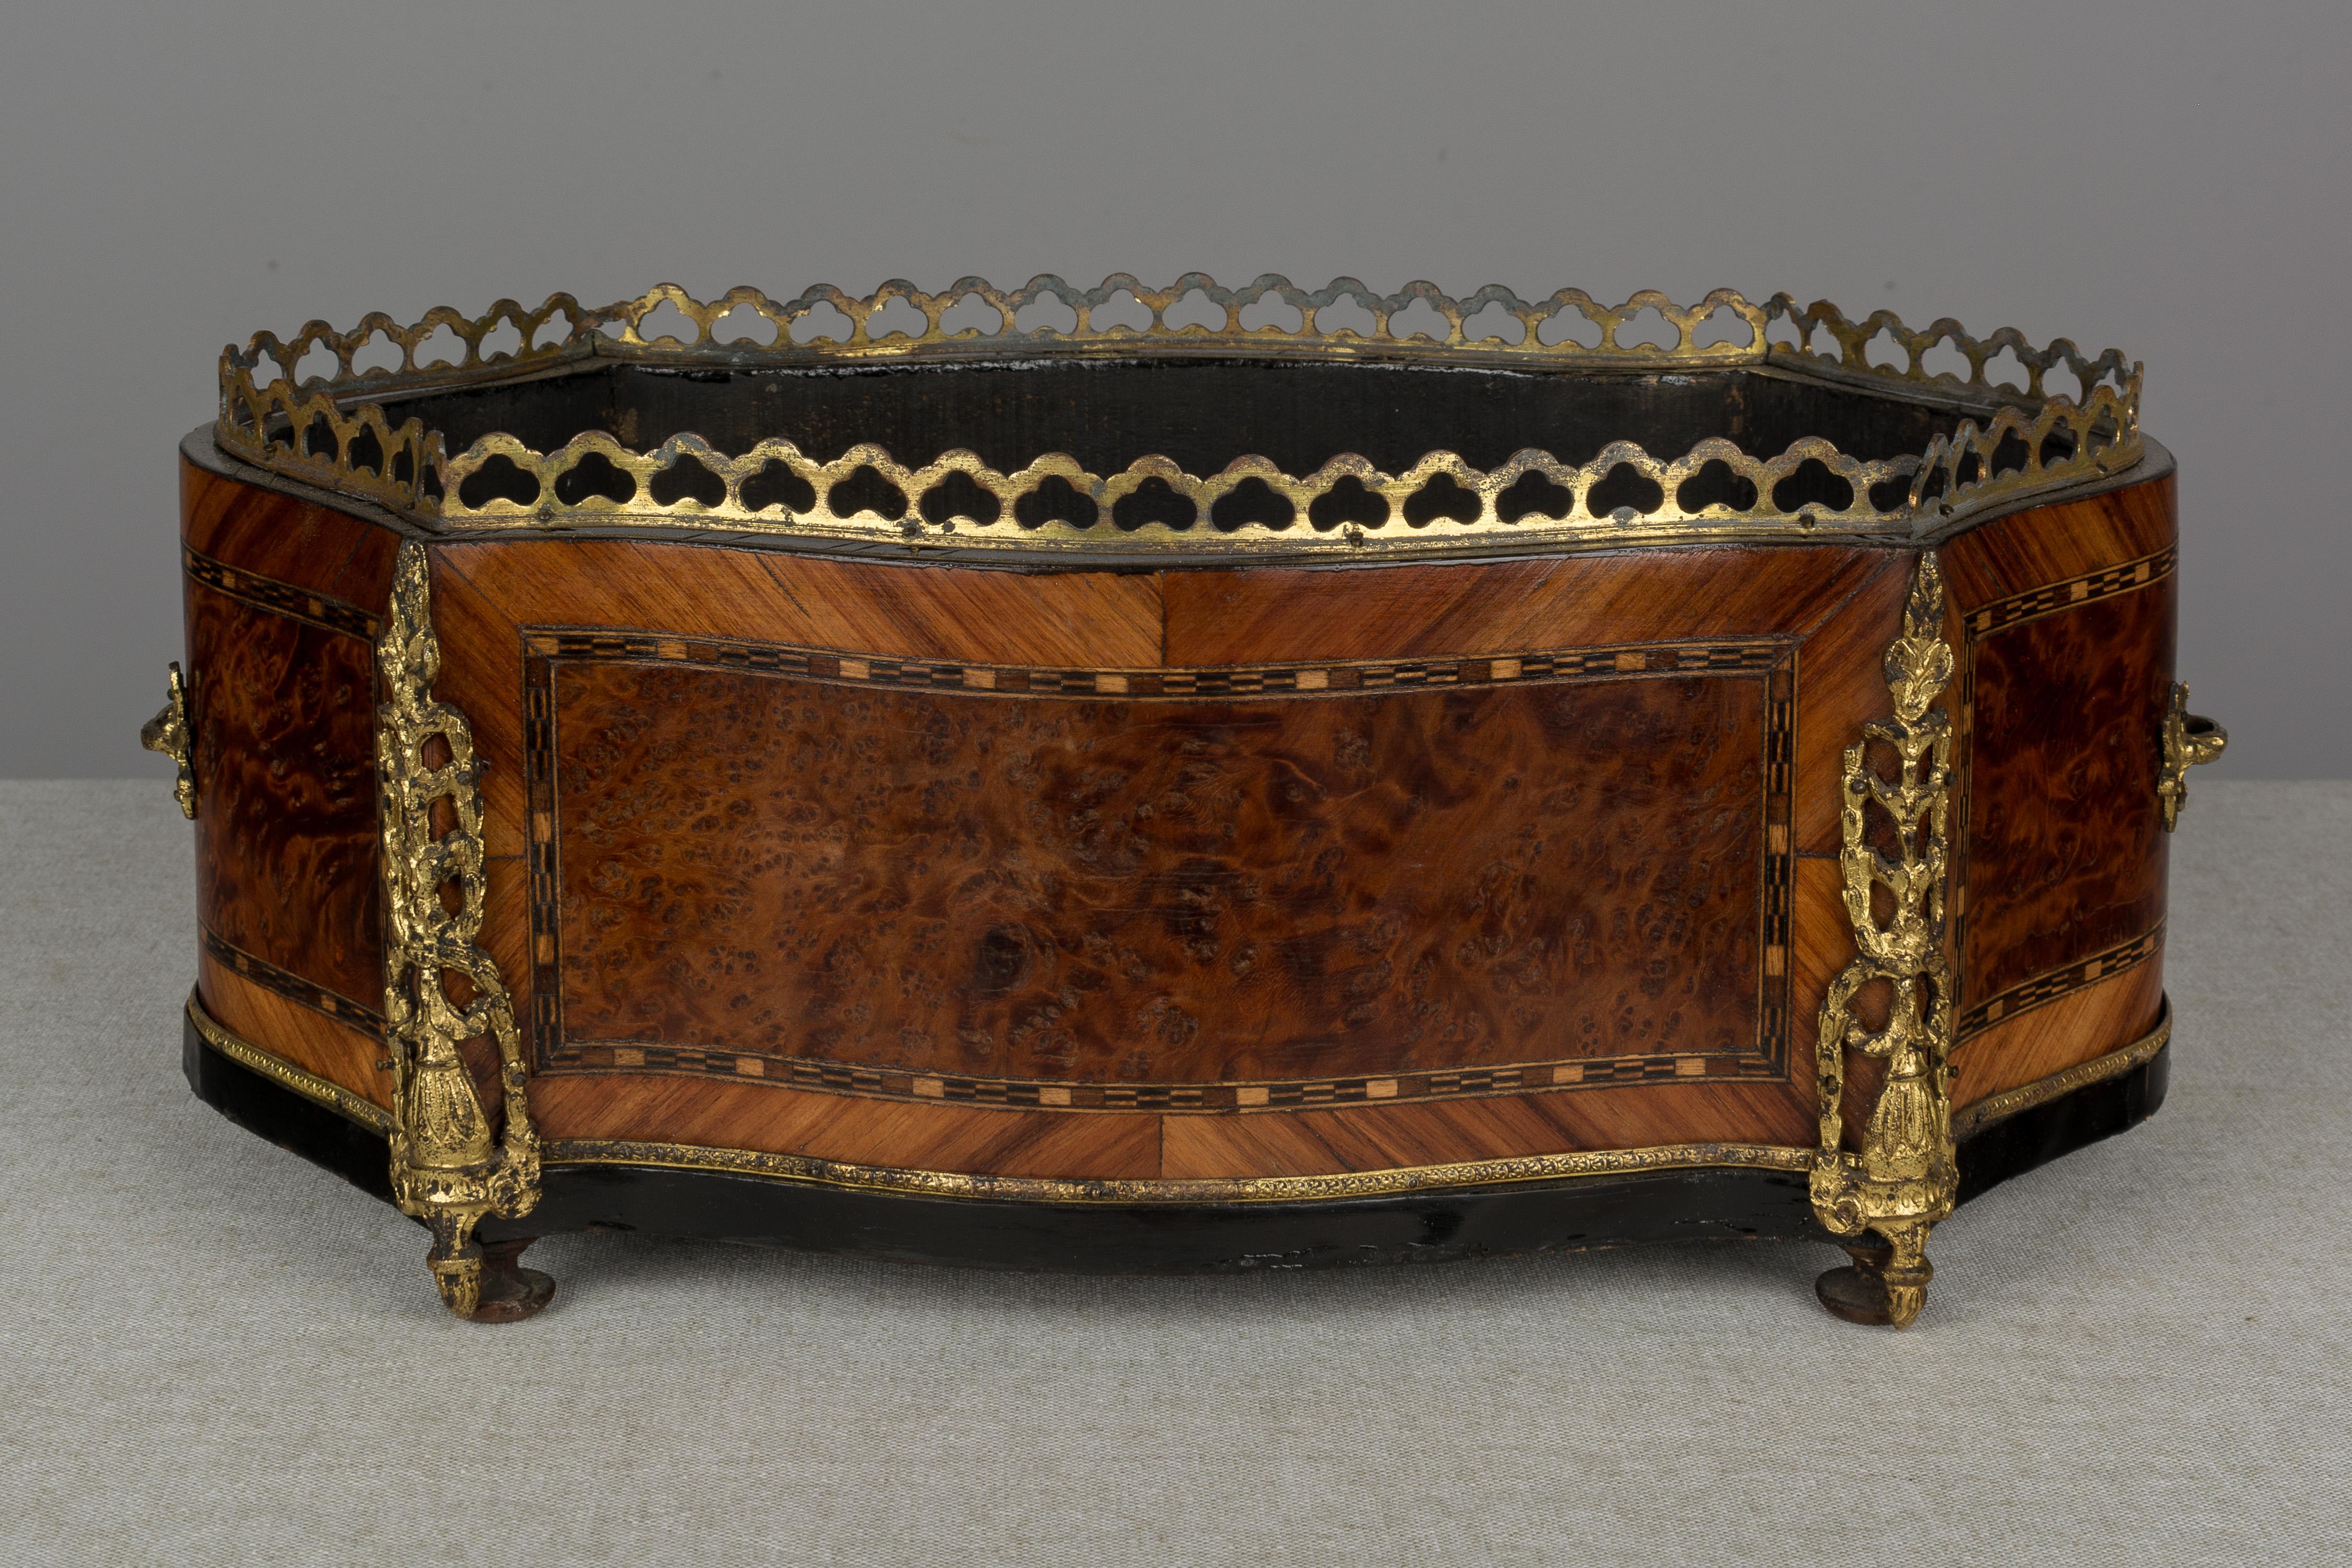 A 19th century Napoleon III marquetry jardinière made of mahogany with burl of walnut veneer and various inlay. Bronze-mounted with two handles, gallery and corner ornaments. Note: there is no zinc liner. A beautiful planter for the display of